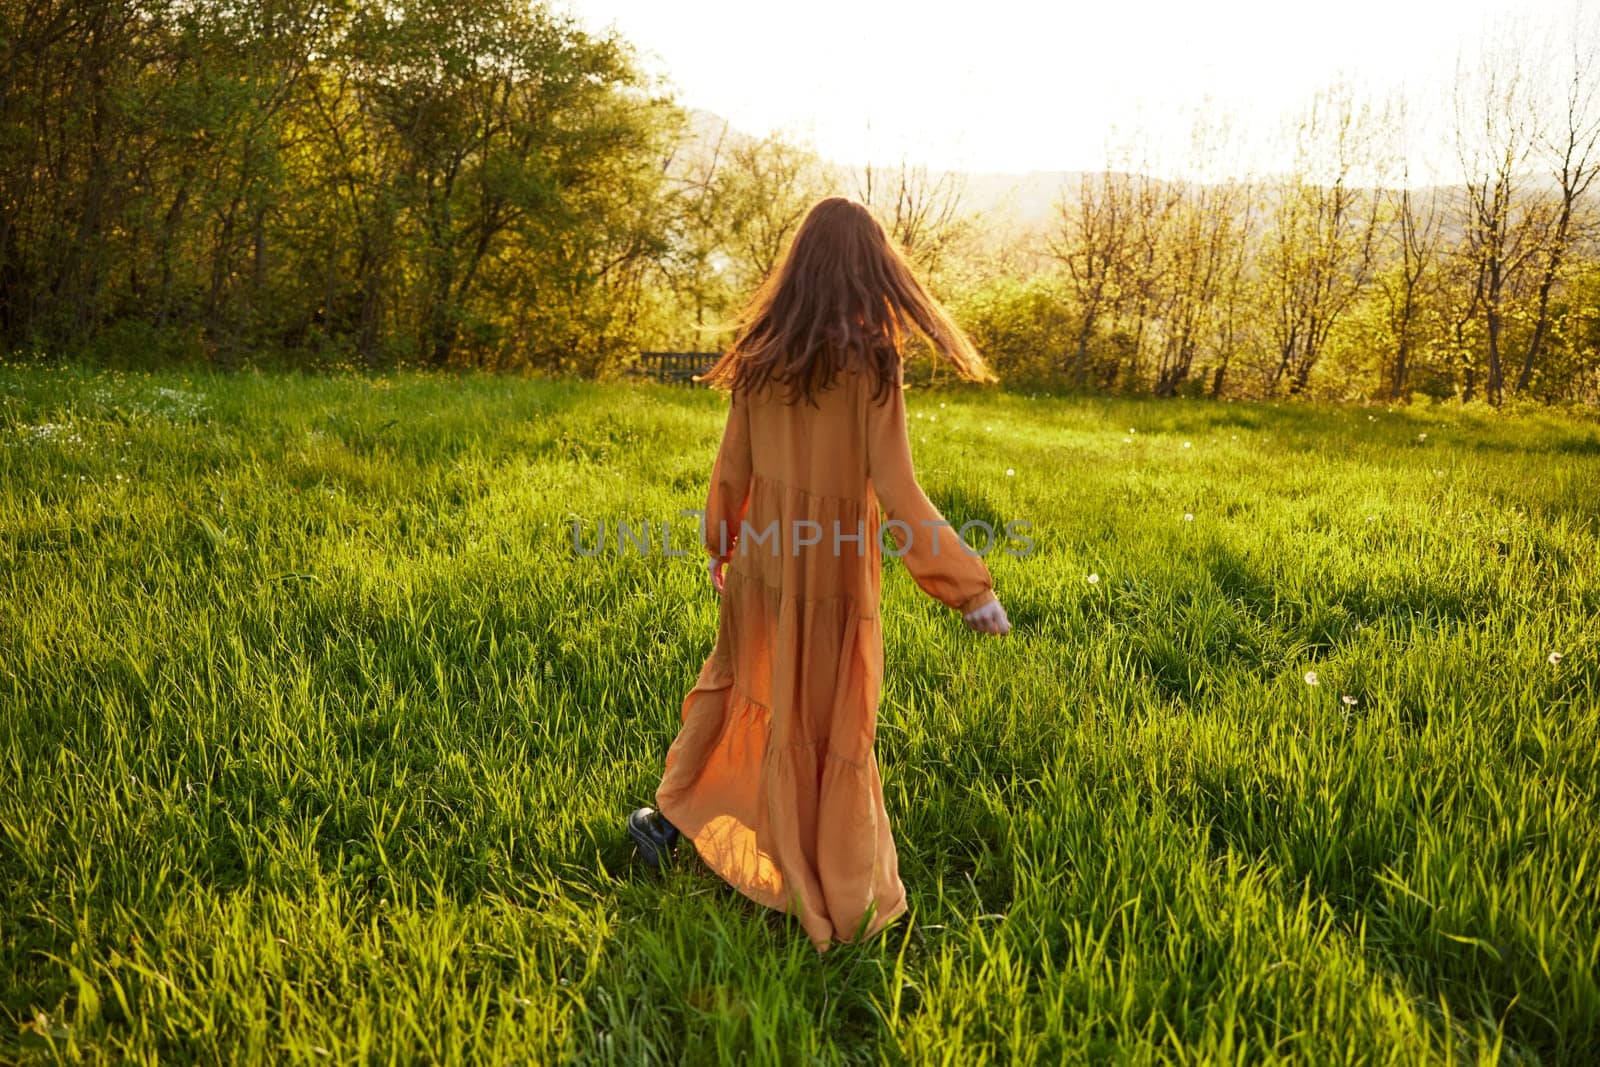 an attractive, slender, red-haired woman walks through a field during sunset, in a long orange dress enjoying unity with nature and relaxation holding the edge of her clothes. High quality photo